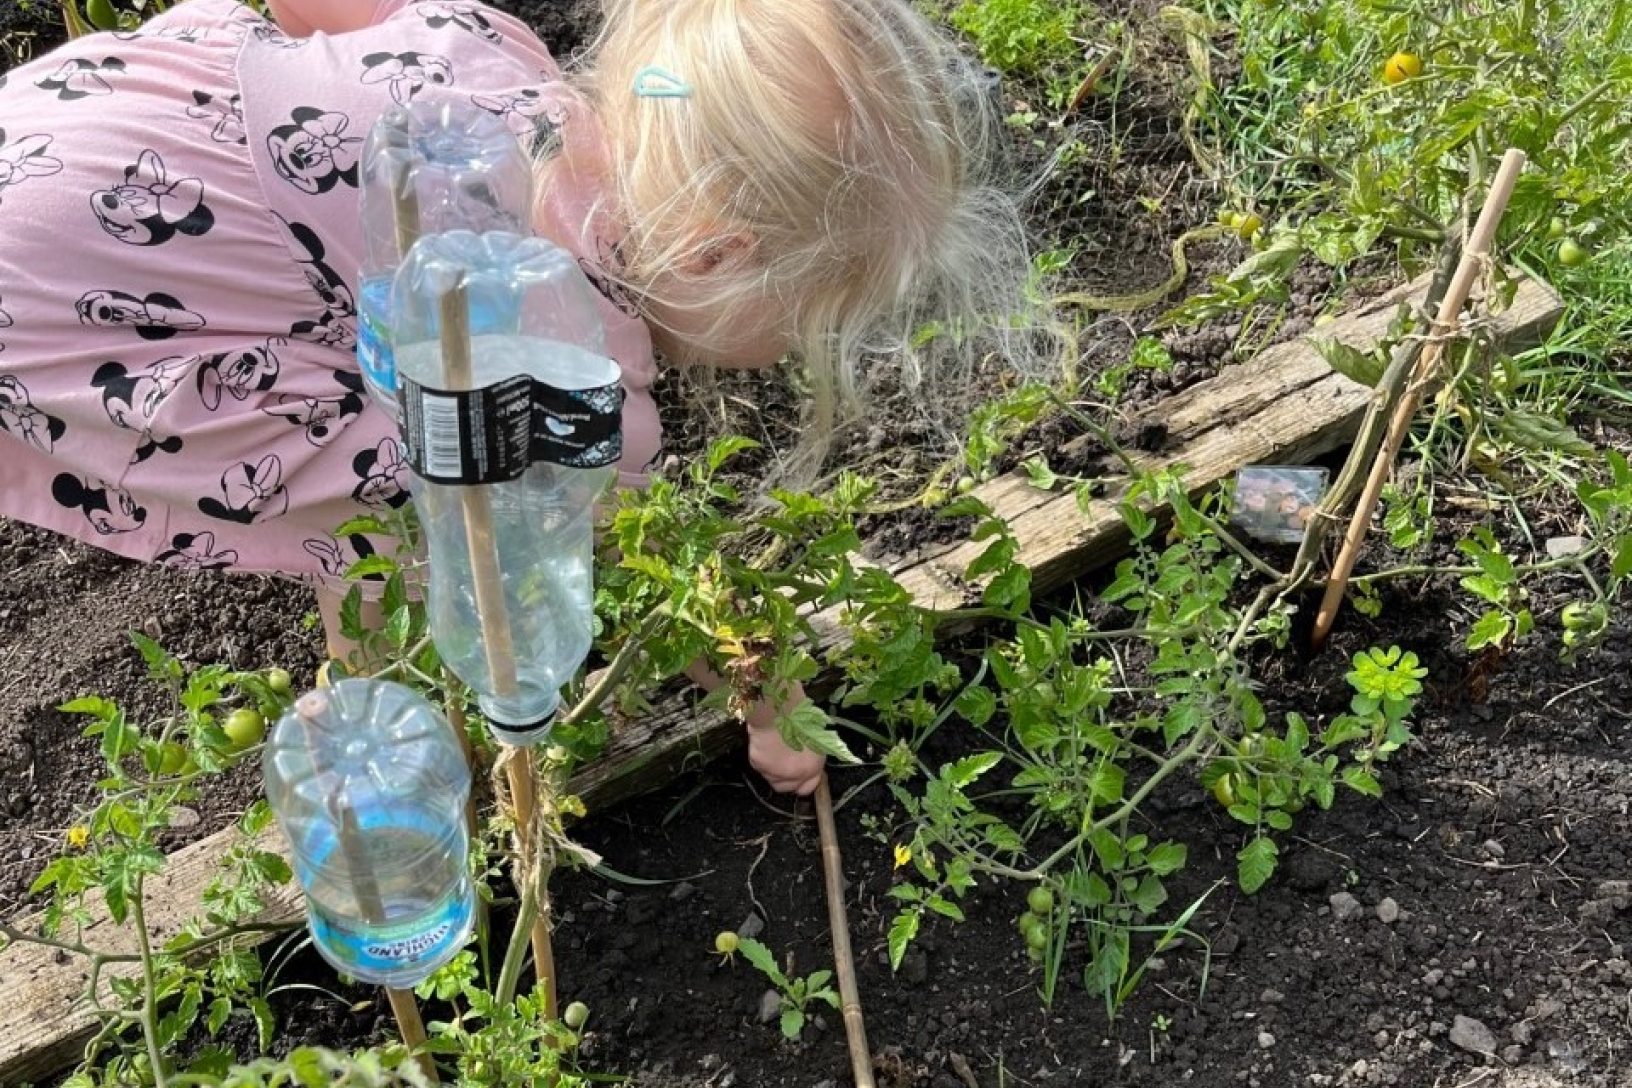 Young girl at allotment leaning over plants